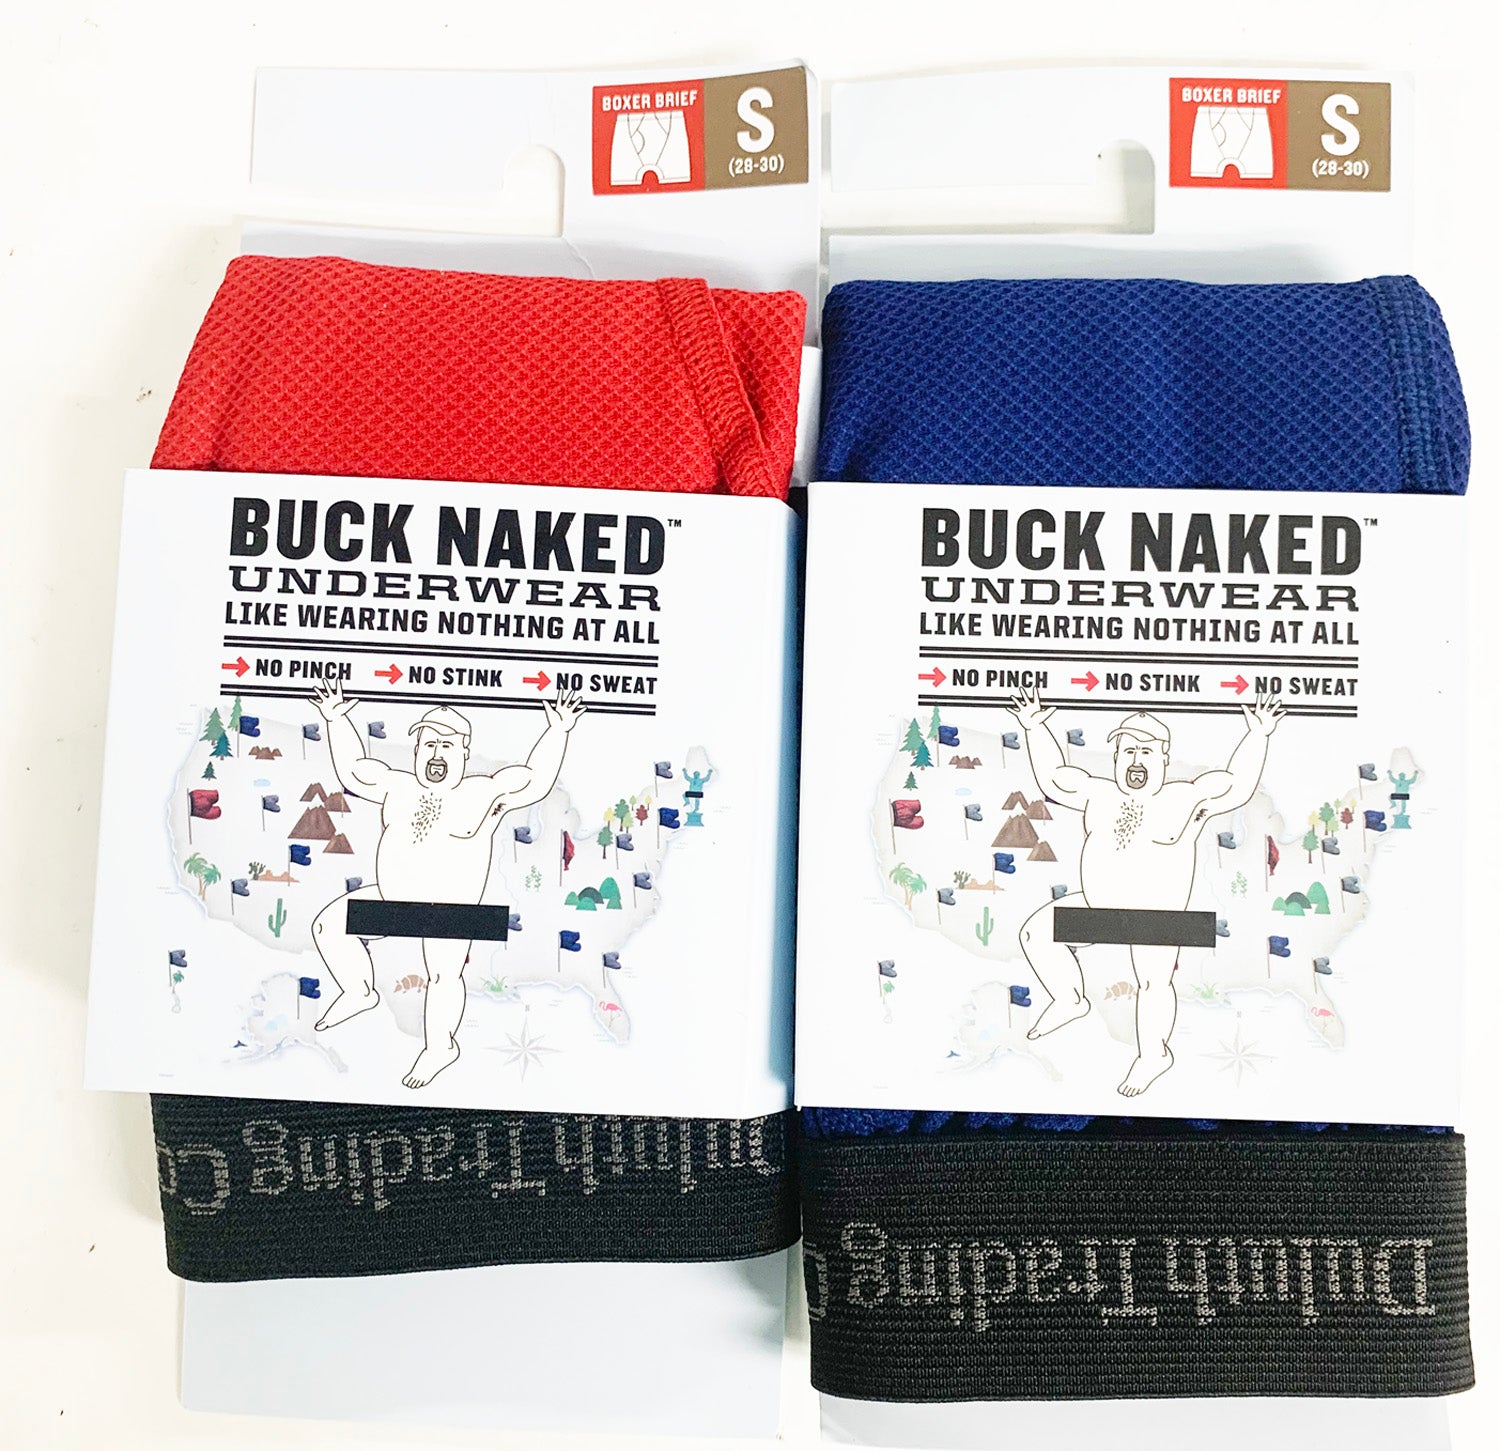 NEW Duluth Buck Naked Navy/Red Boxer Briefs 2 Pack Small (S) (28-30)